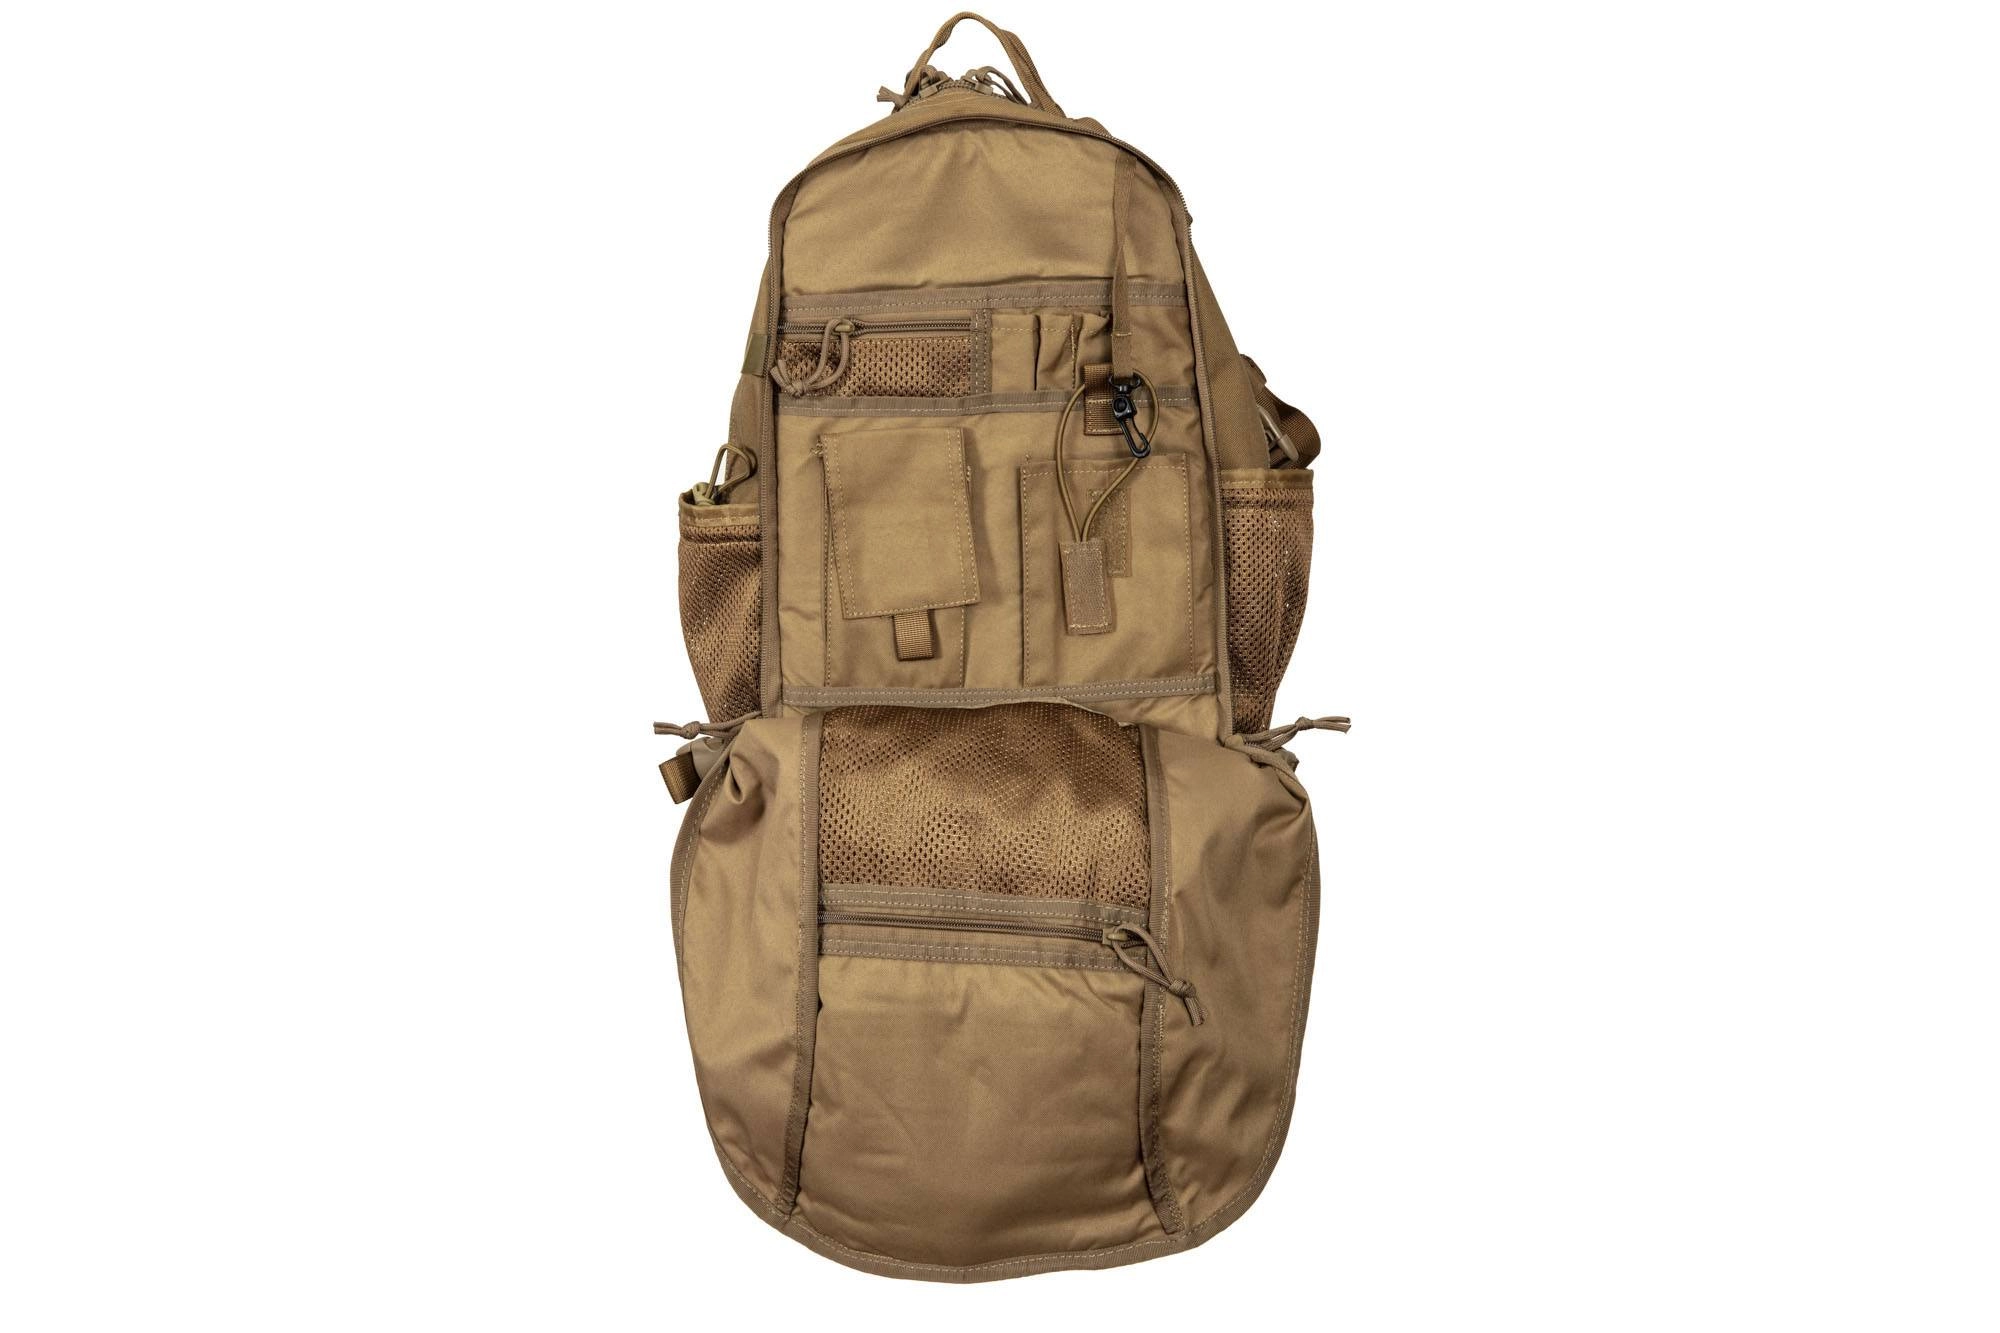 AFB / Advance Field Backpack - Coyote Brown